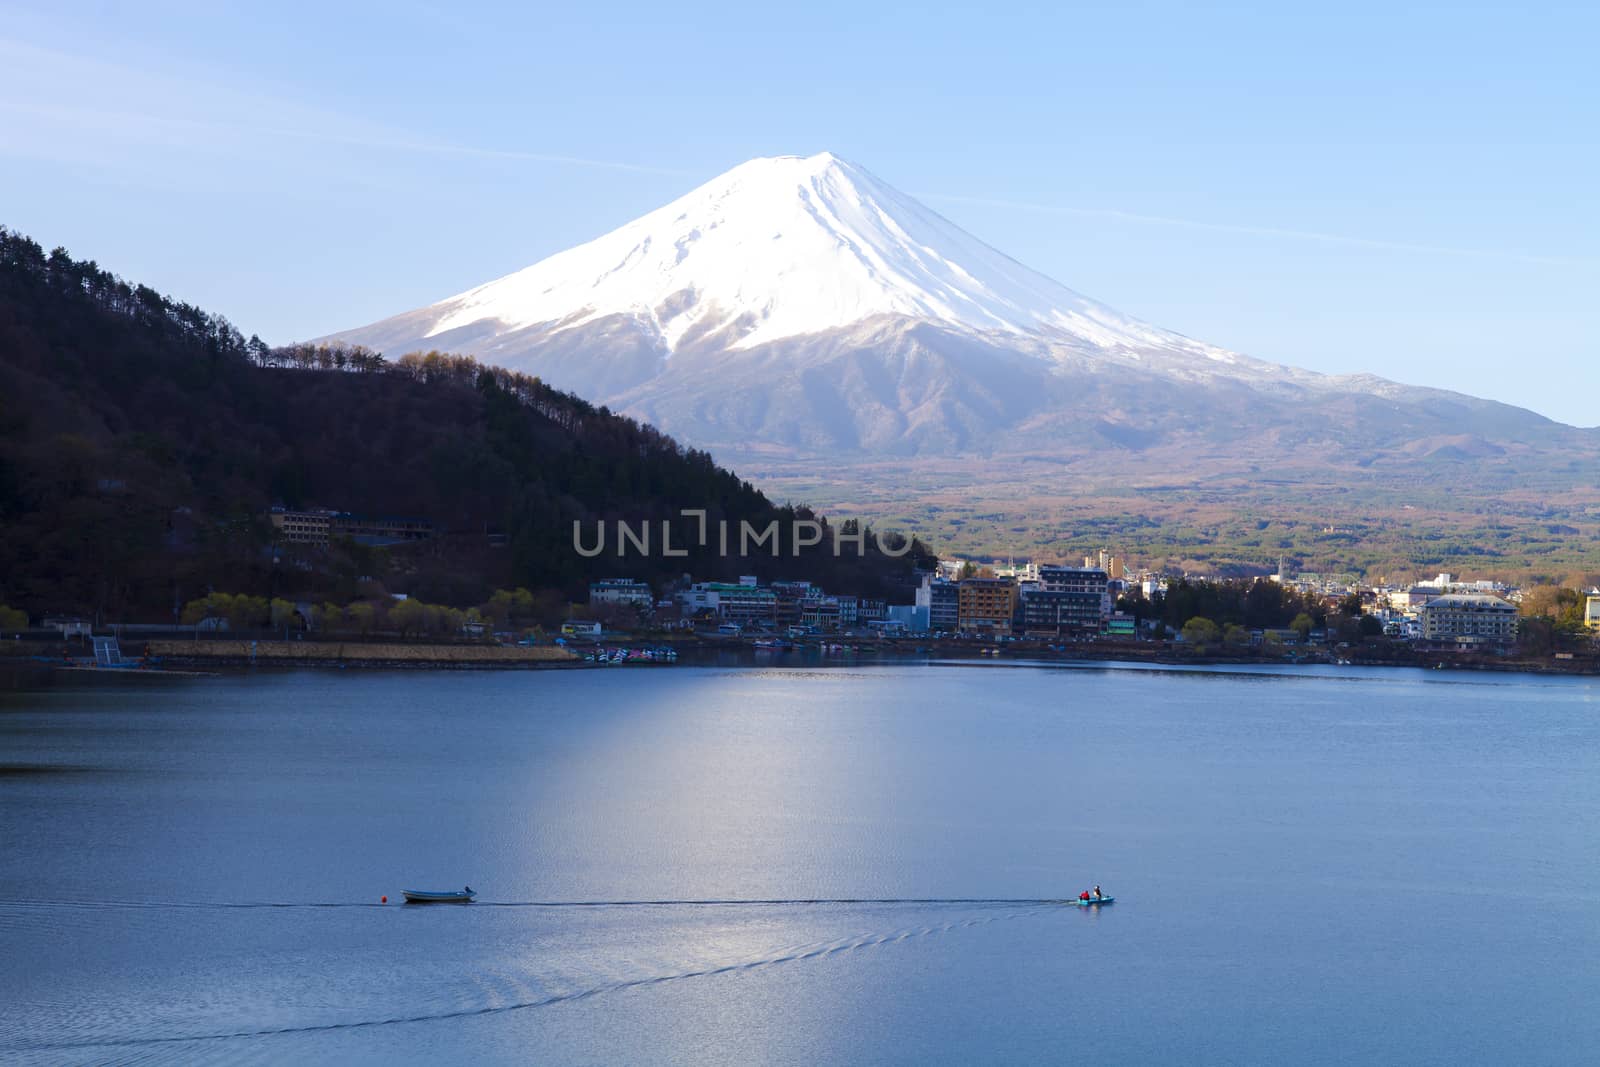 Lake Kawaguchiko is the most easily accessible of the Fuji Five Lakes with train and direct bus connections to Tokyo.